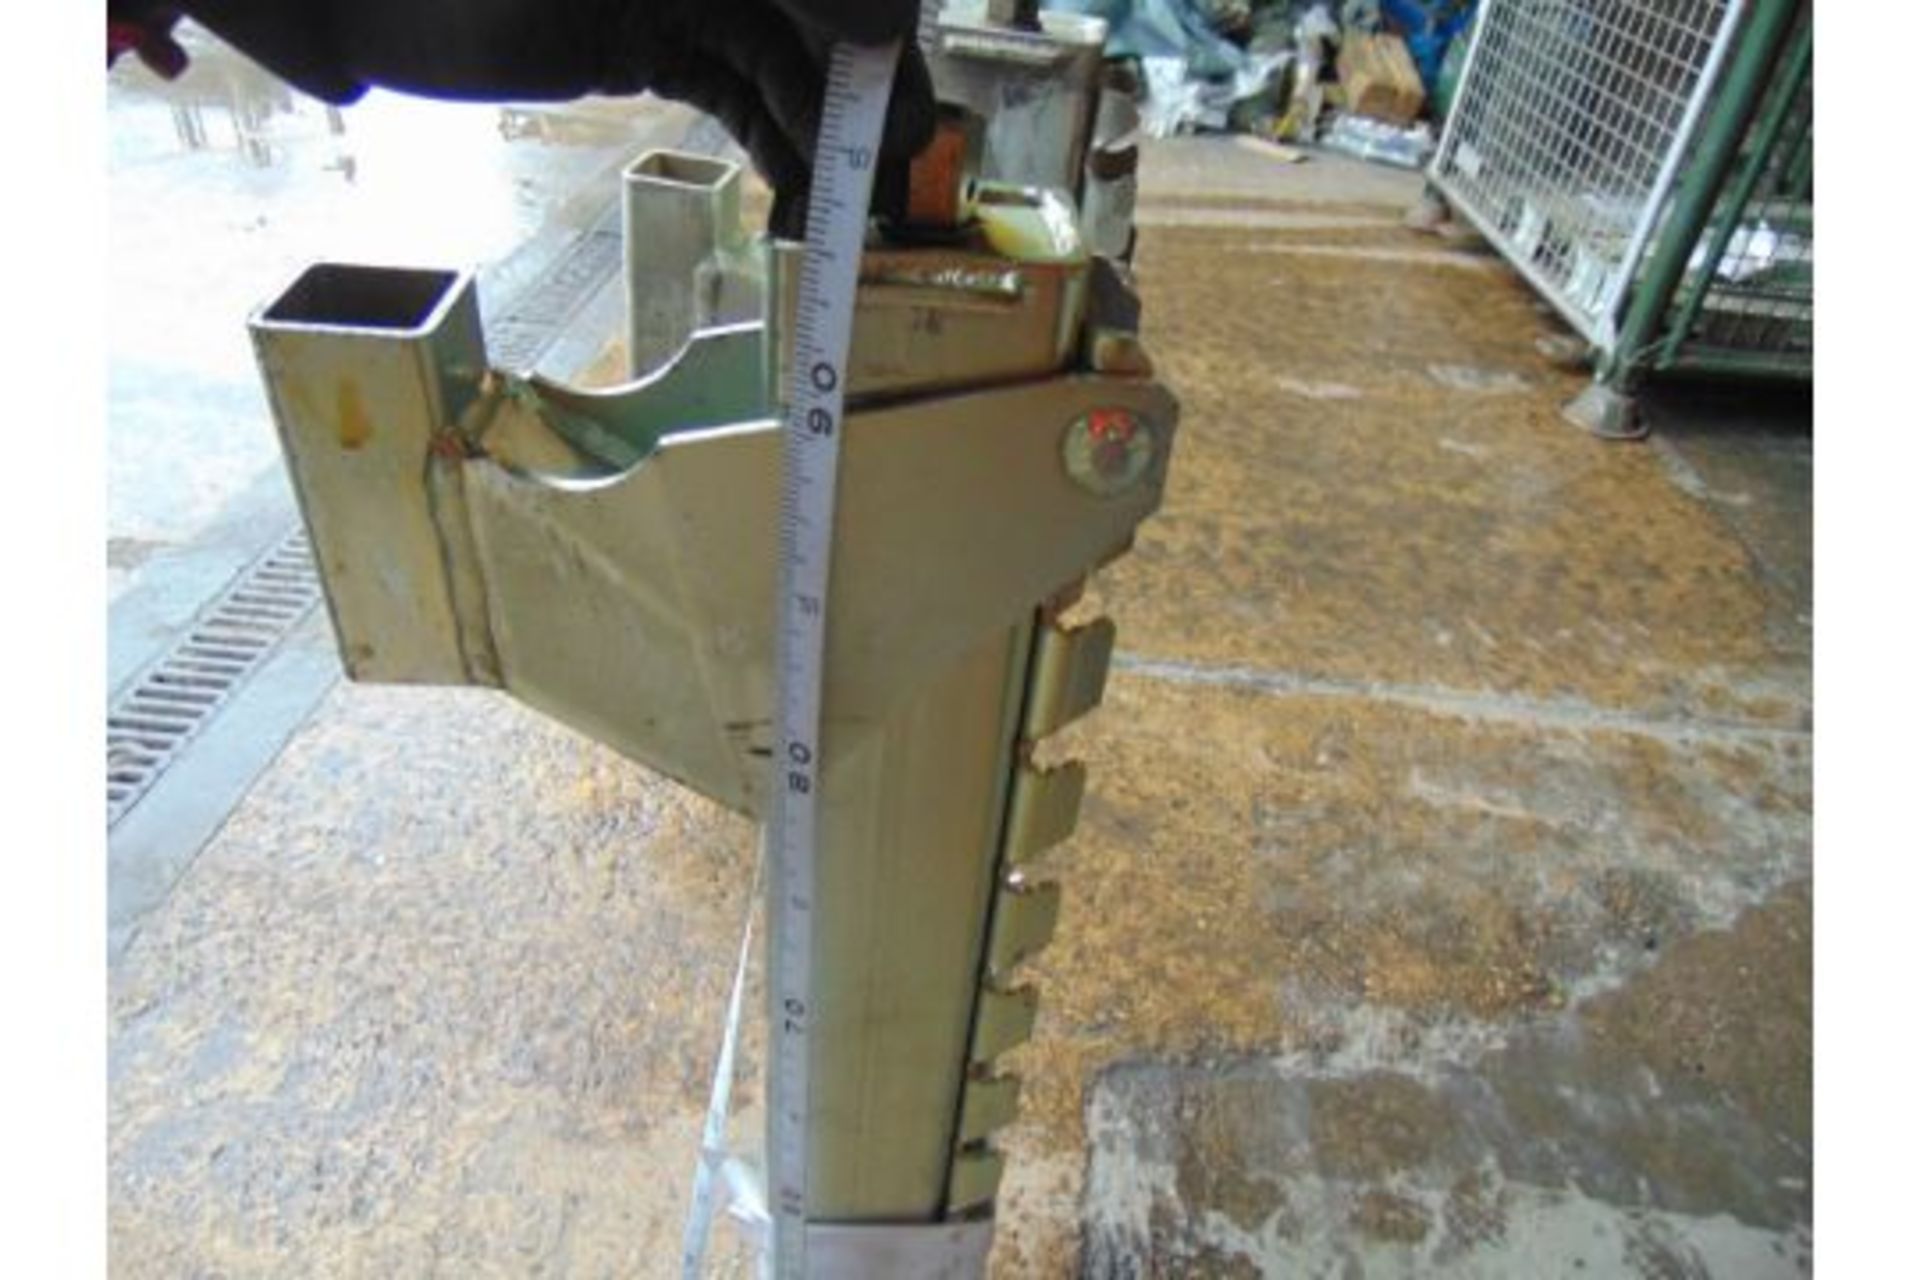 2 x New Unissued 2400kgs High Lift Screw Jacks for 4x4's etc 90cms as shown - Image 4 of 5